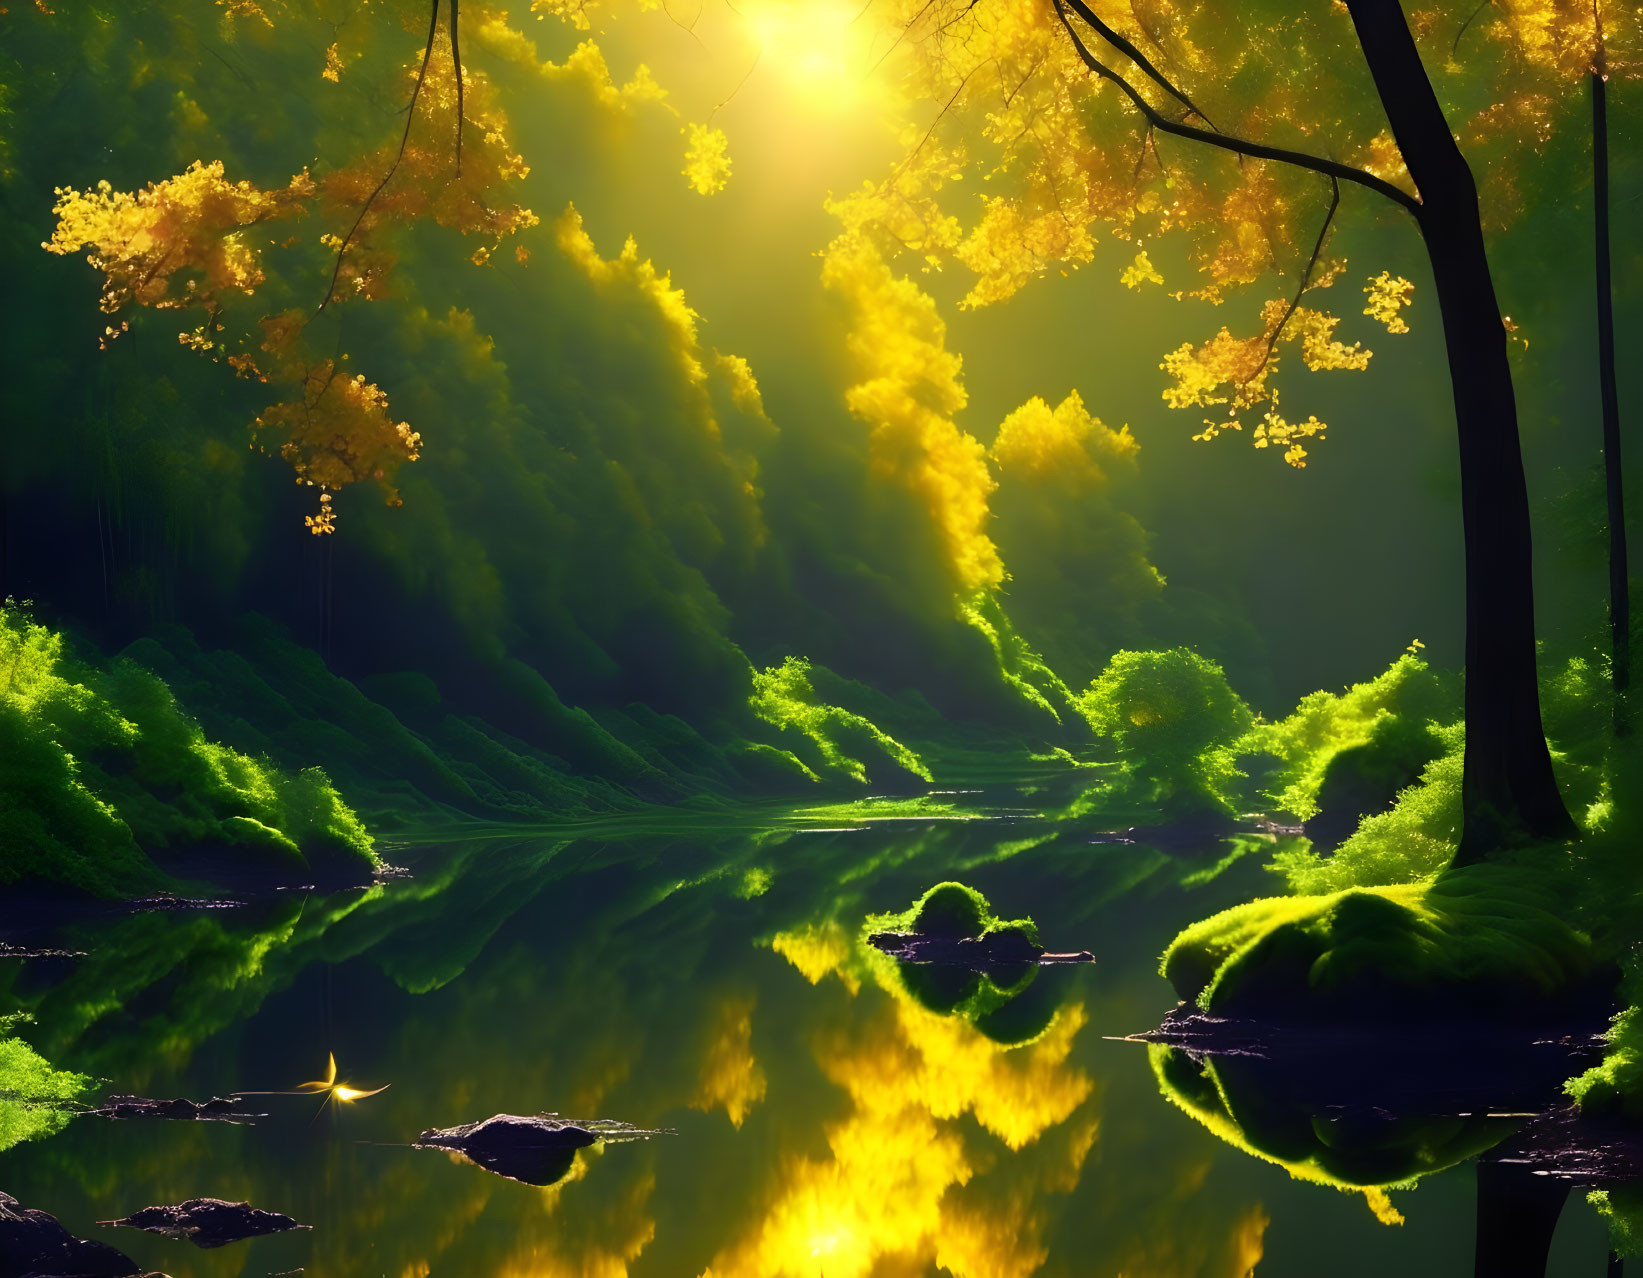 Tranquil forest landscape with sunlight, river, and lush greenery